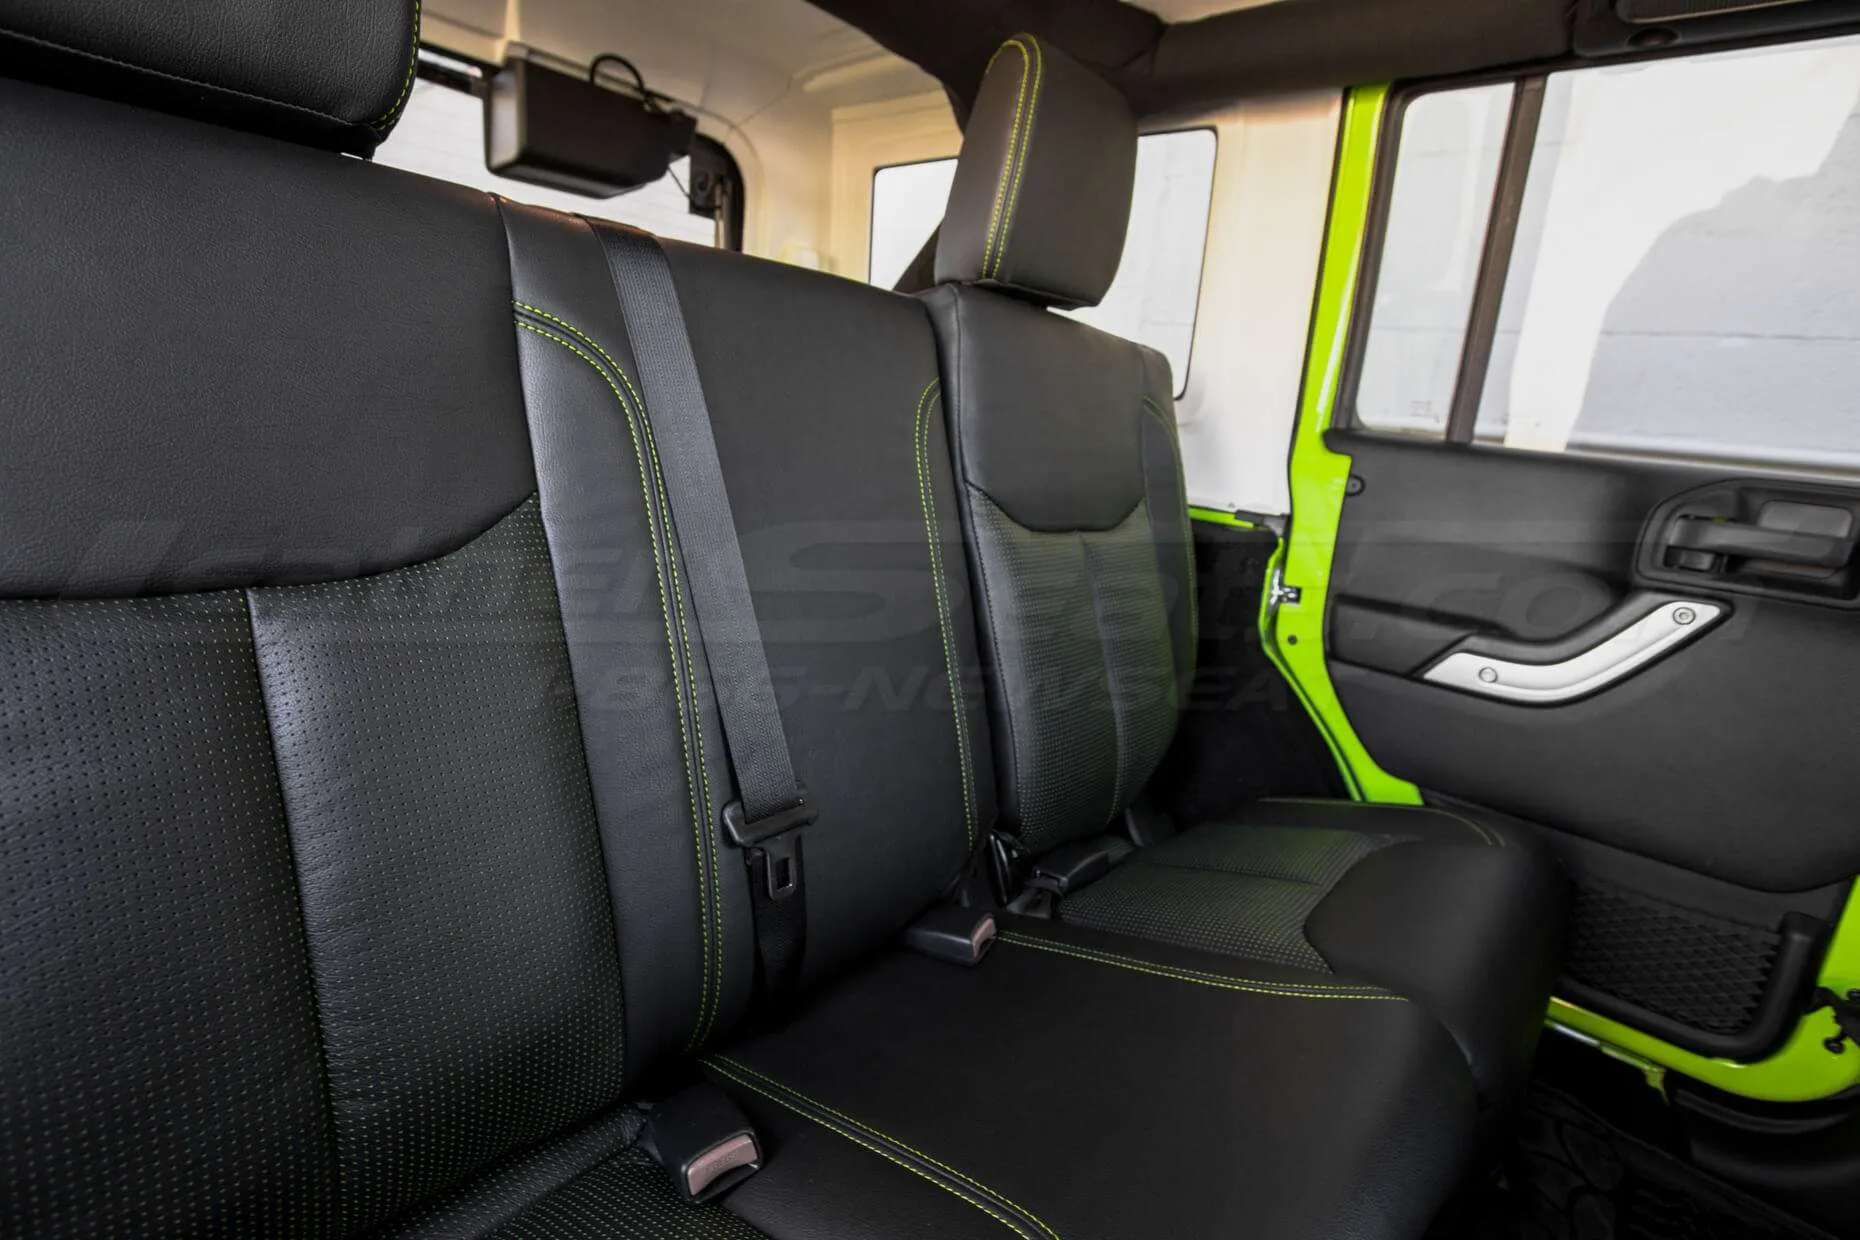 Jeep Wrangler Installed Leather Seats - Black & Piazza Green - Rear seat piazza perforation